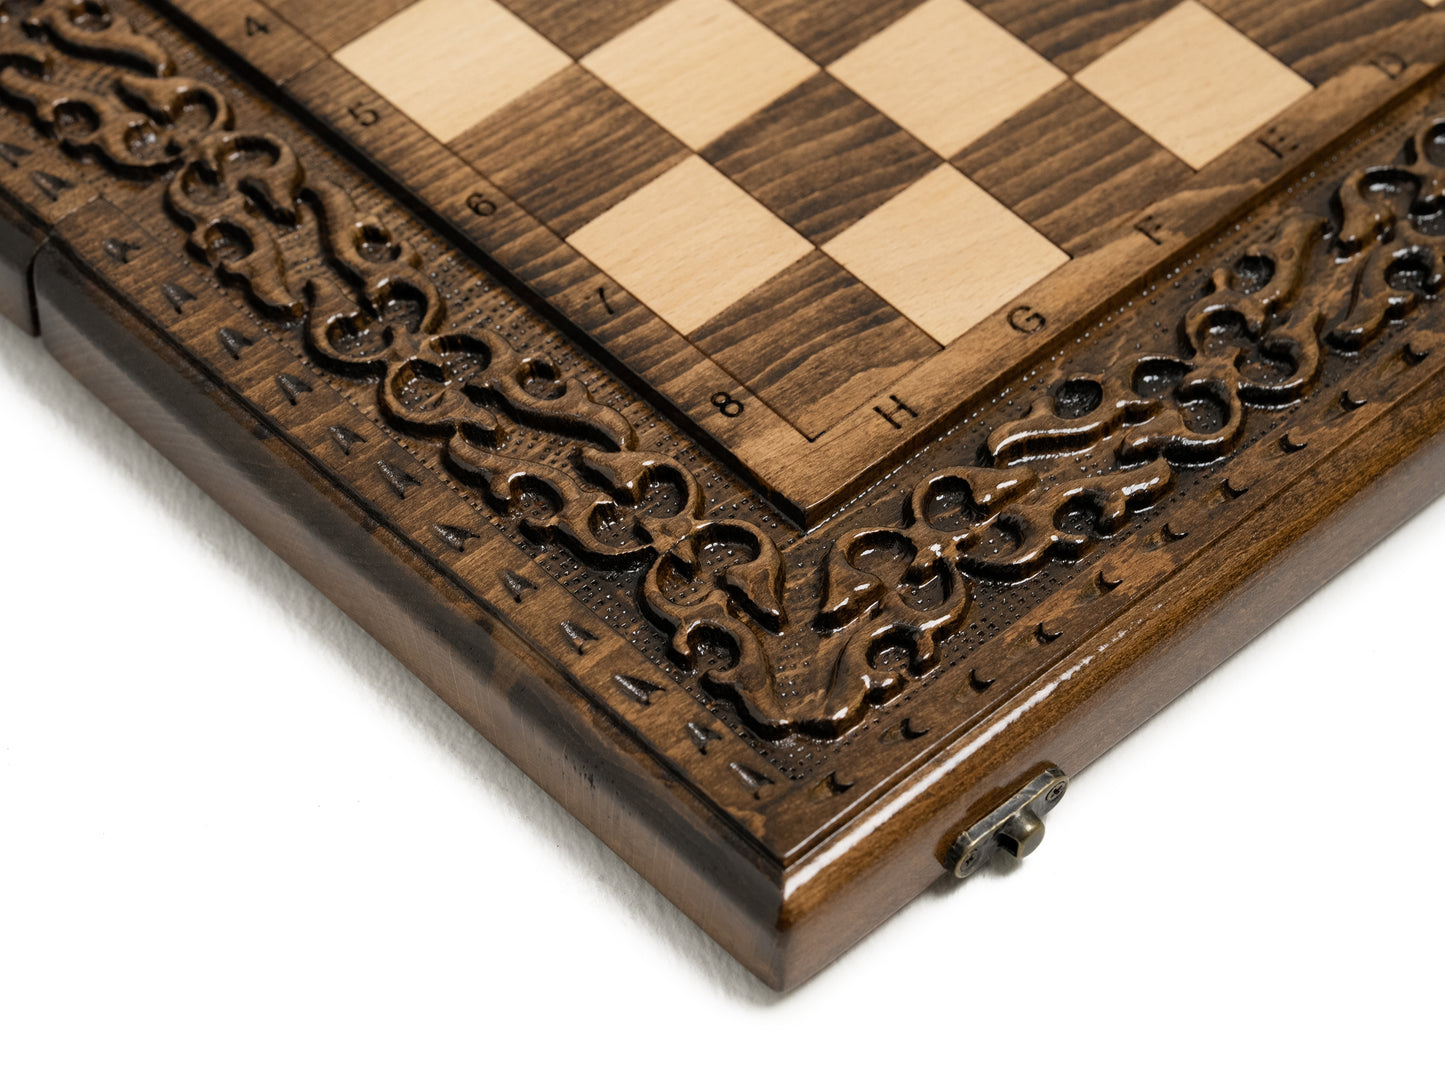 Detailed wooden chess pieces arranged on the board